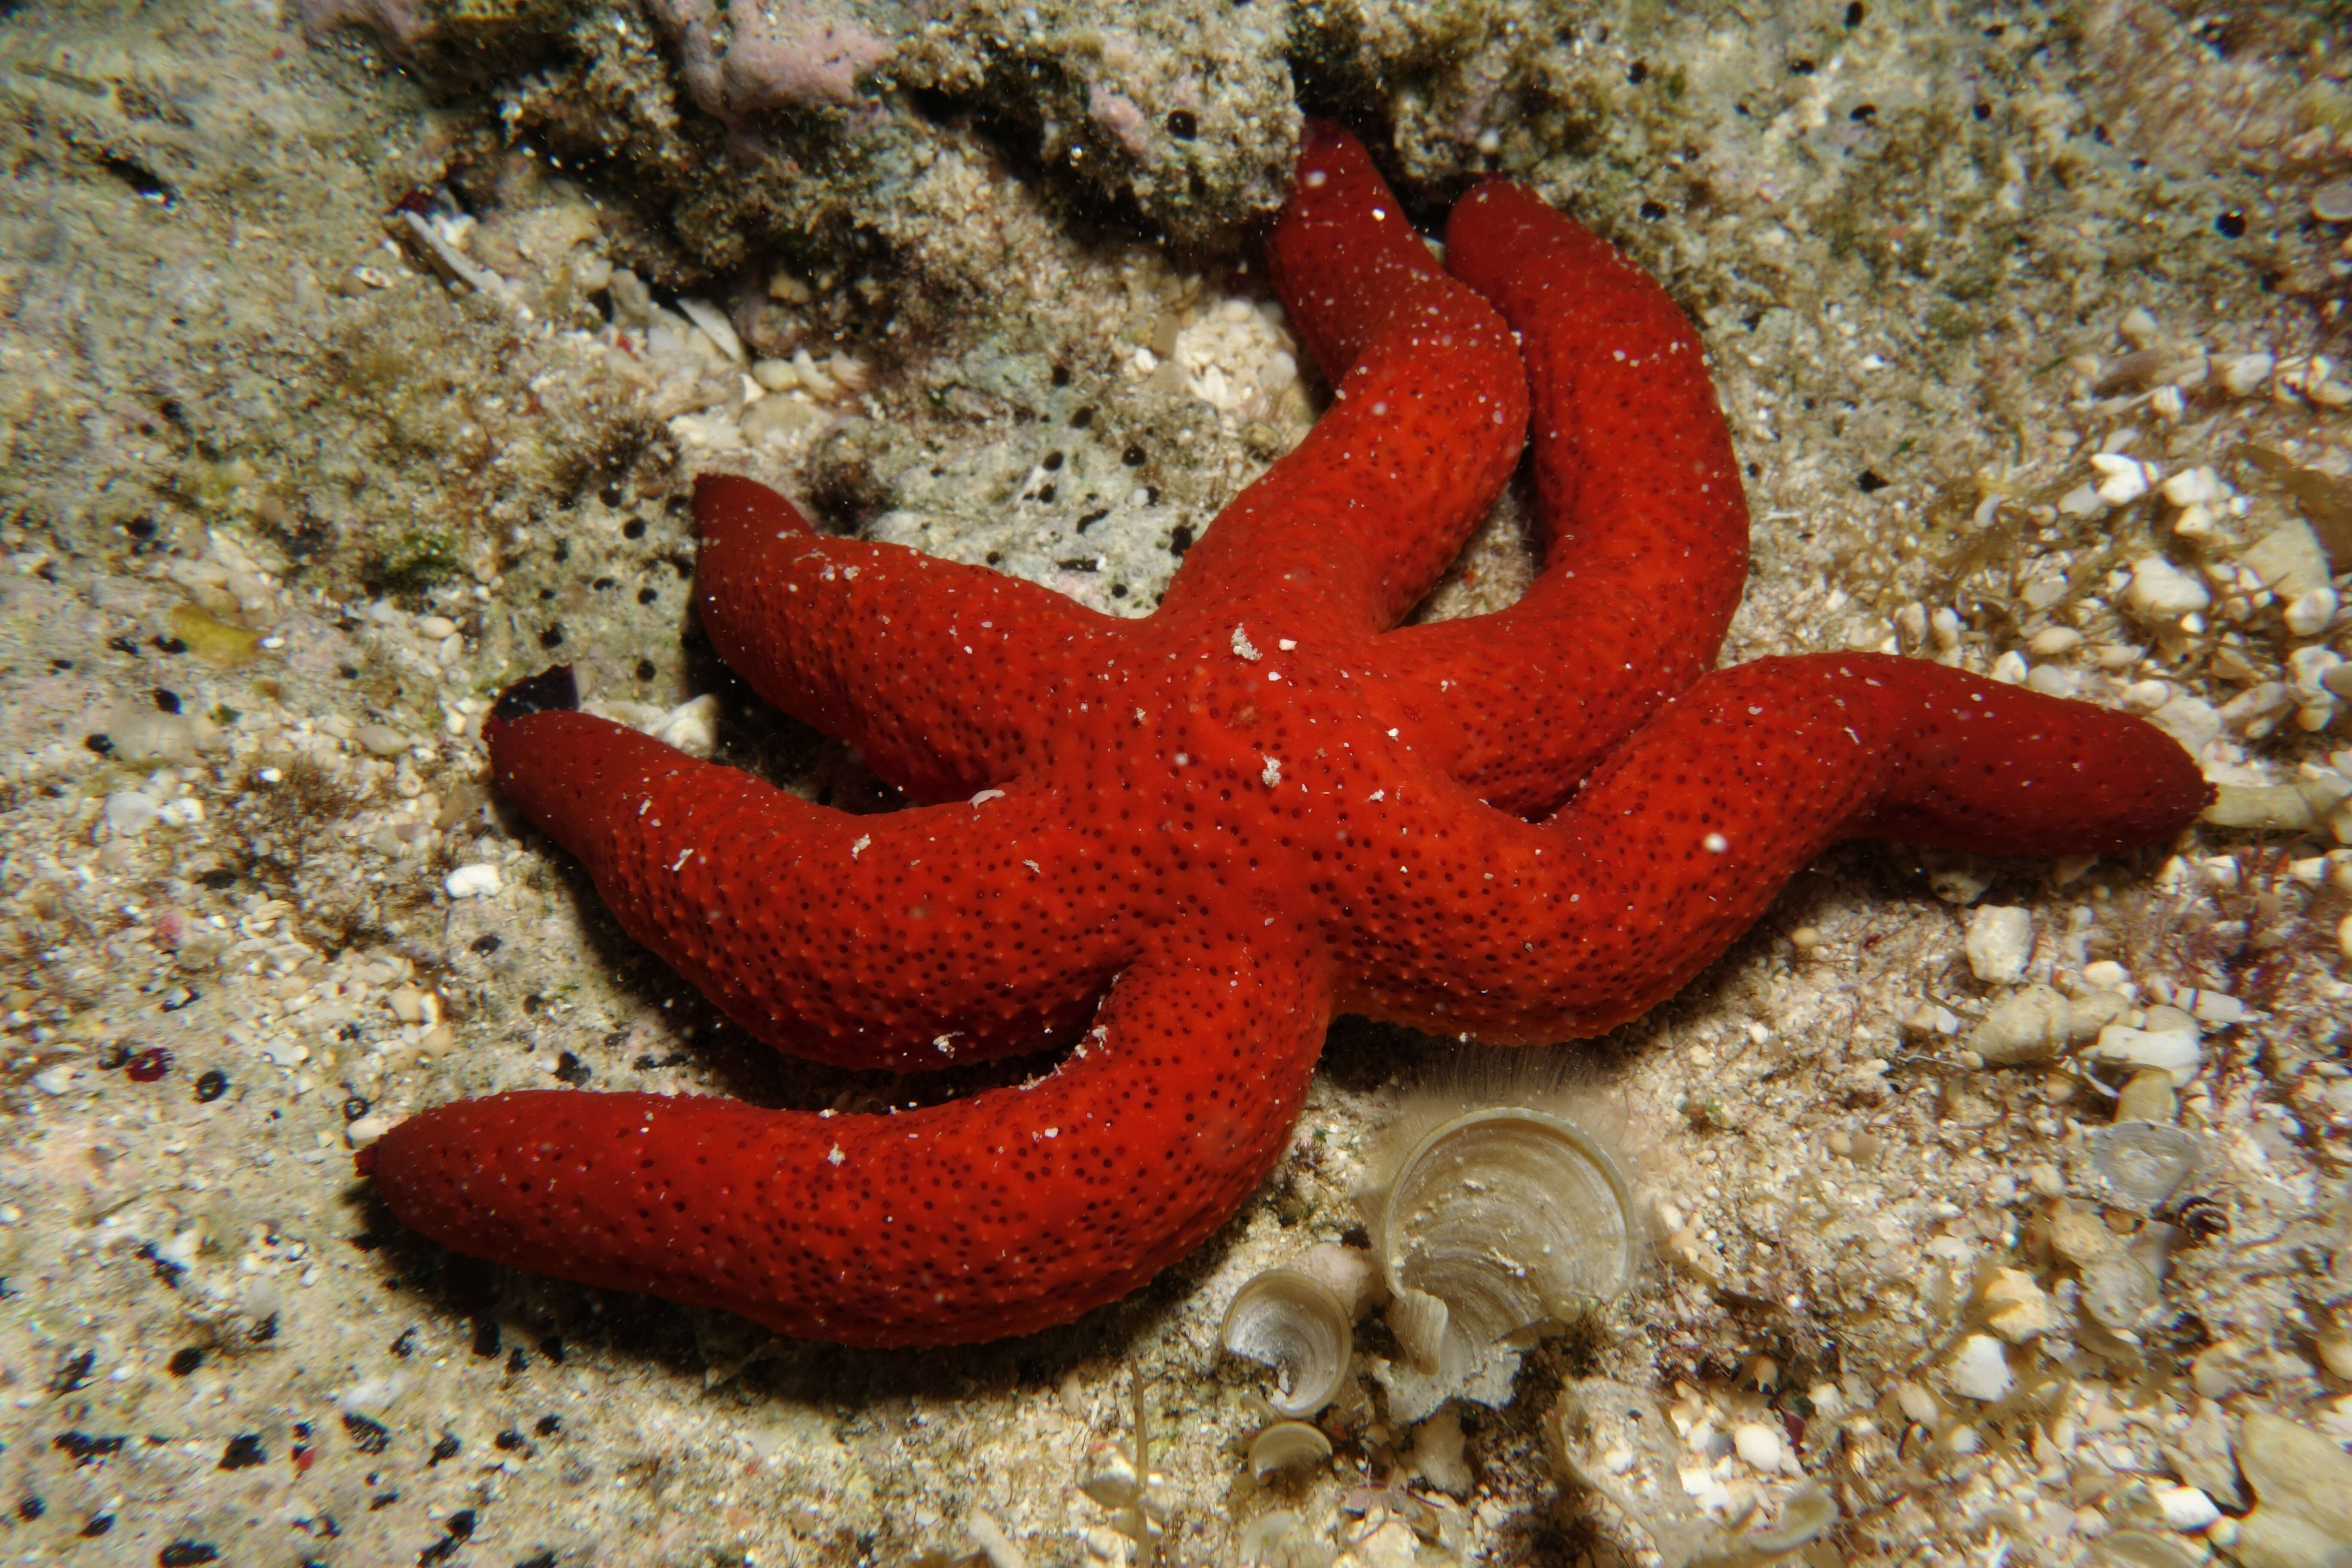 The amazing return of the starfish: species triumphs over melting disease, Marine life